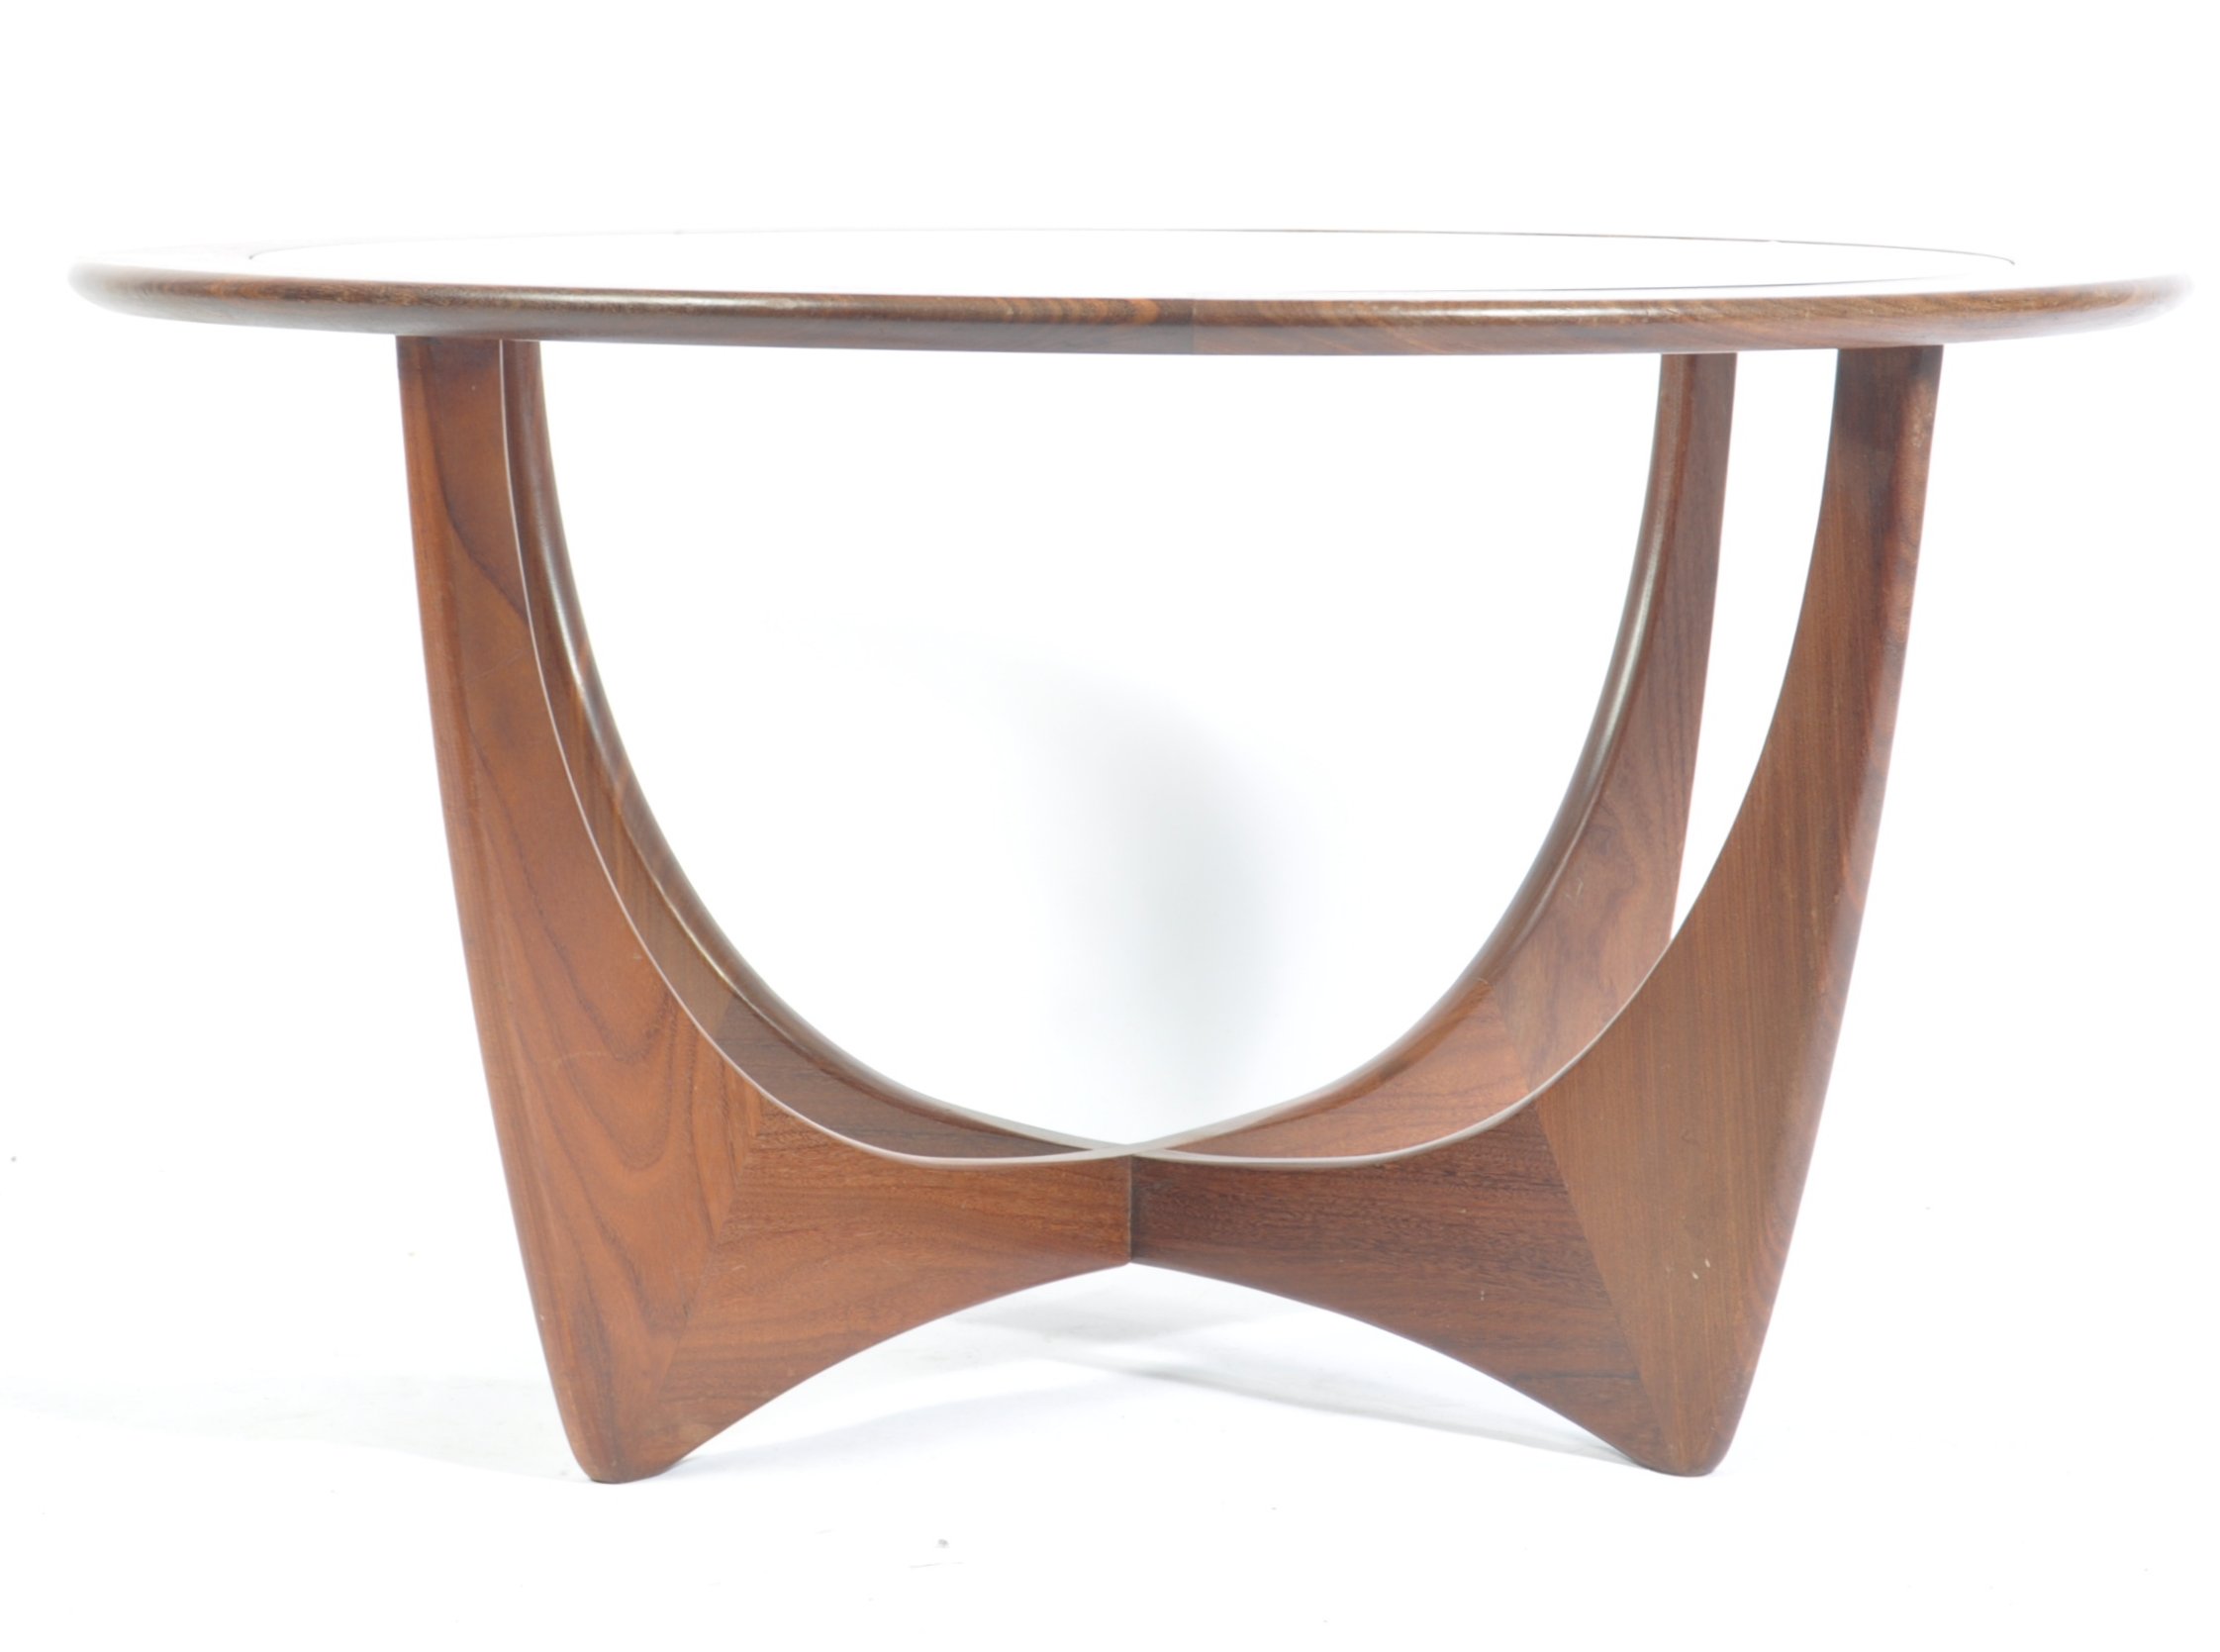 E. GOMME / G PLAN ASTRO TEAK WOOD COFFEE TABLE BY VB. WILKINS